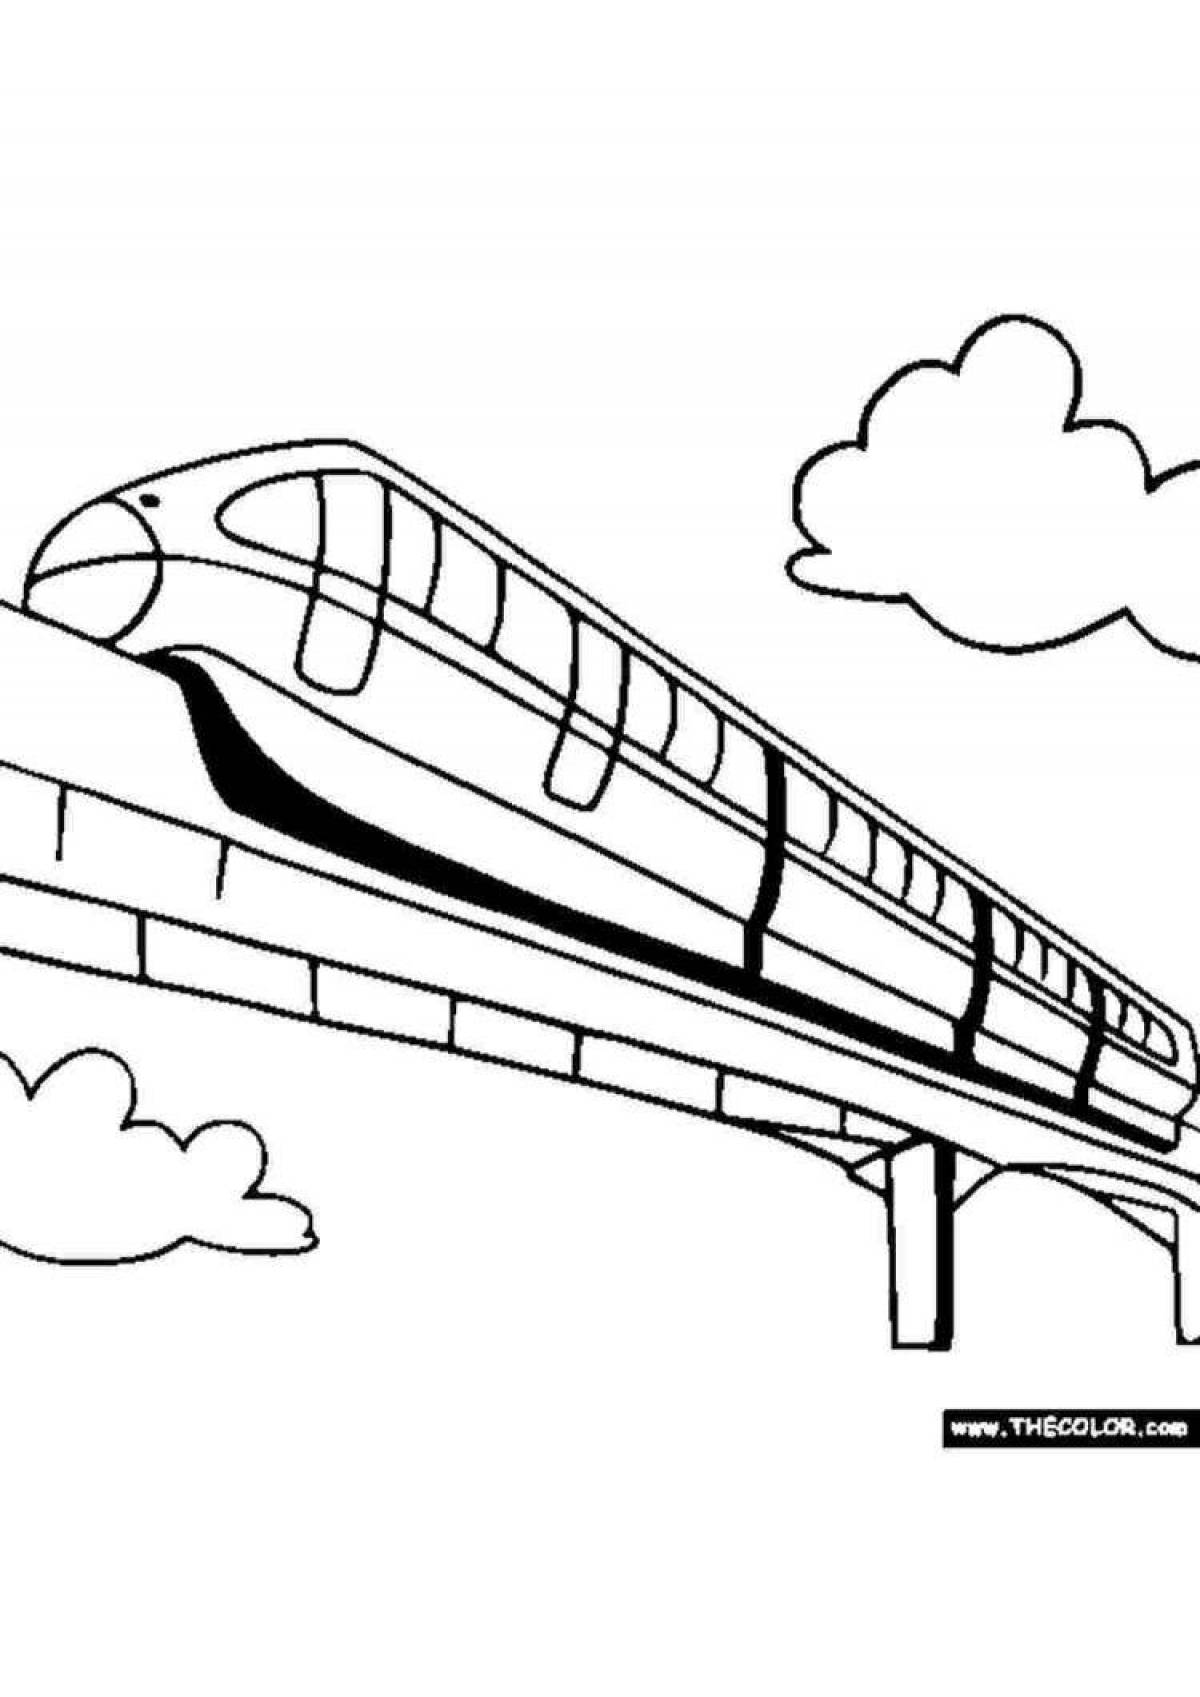 Fat train coloring book for 6-7 year olds